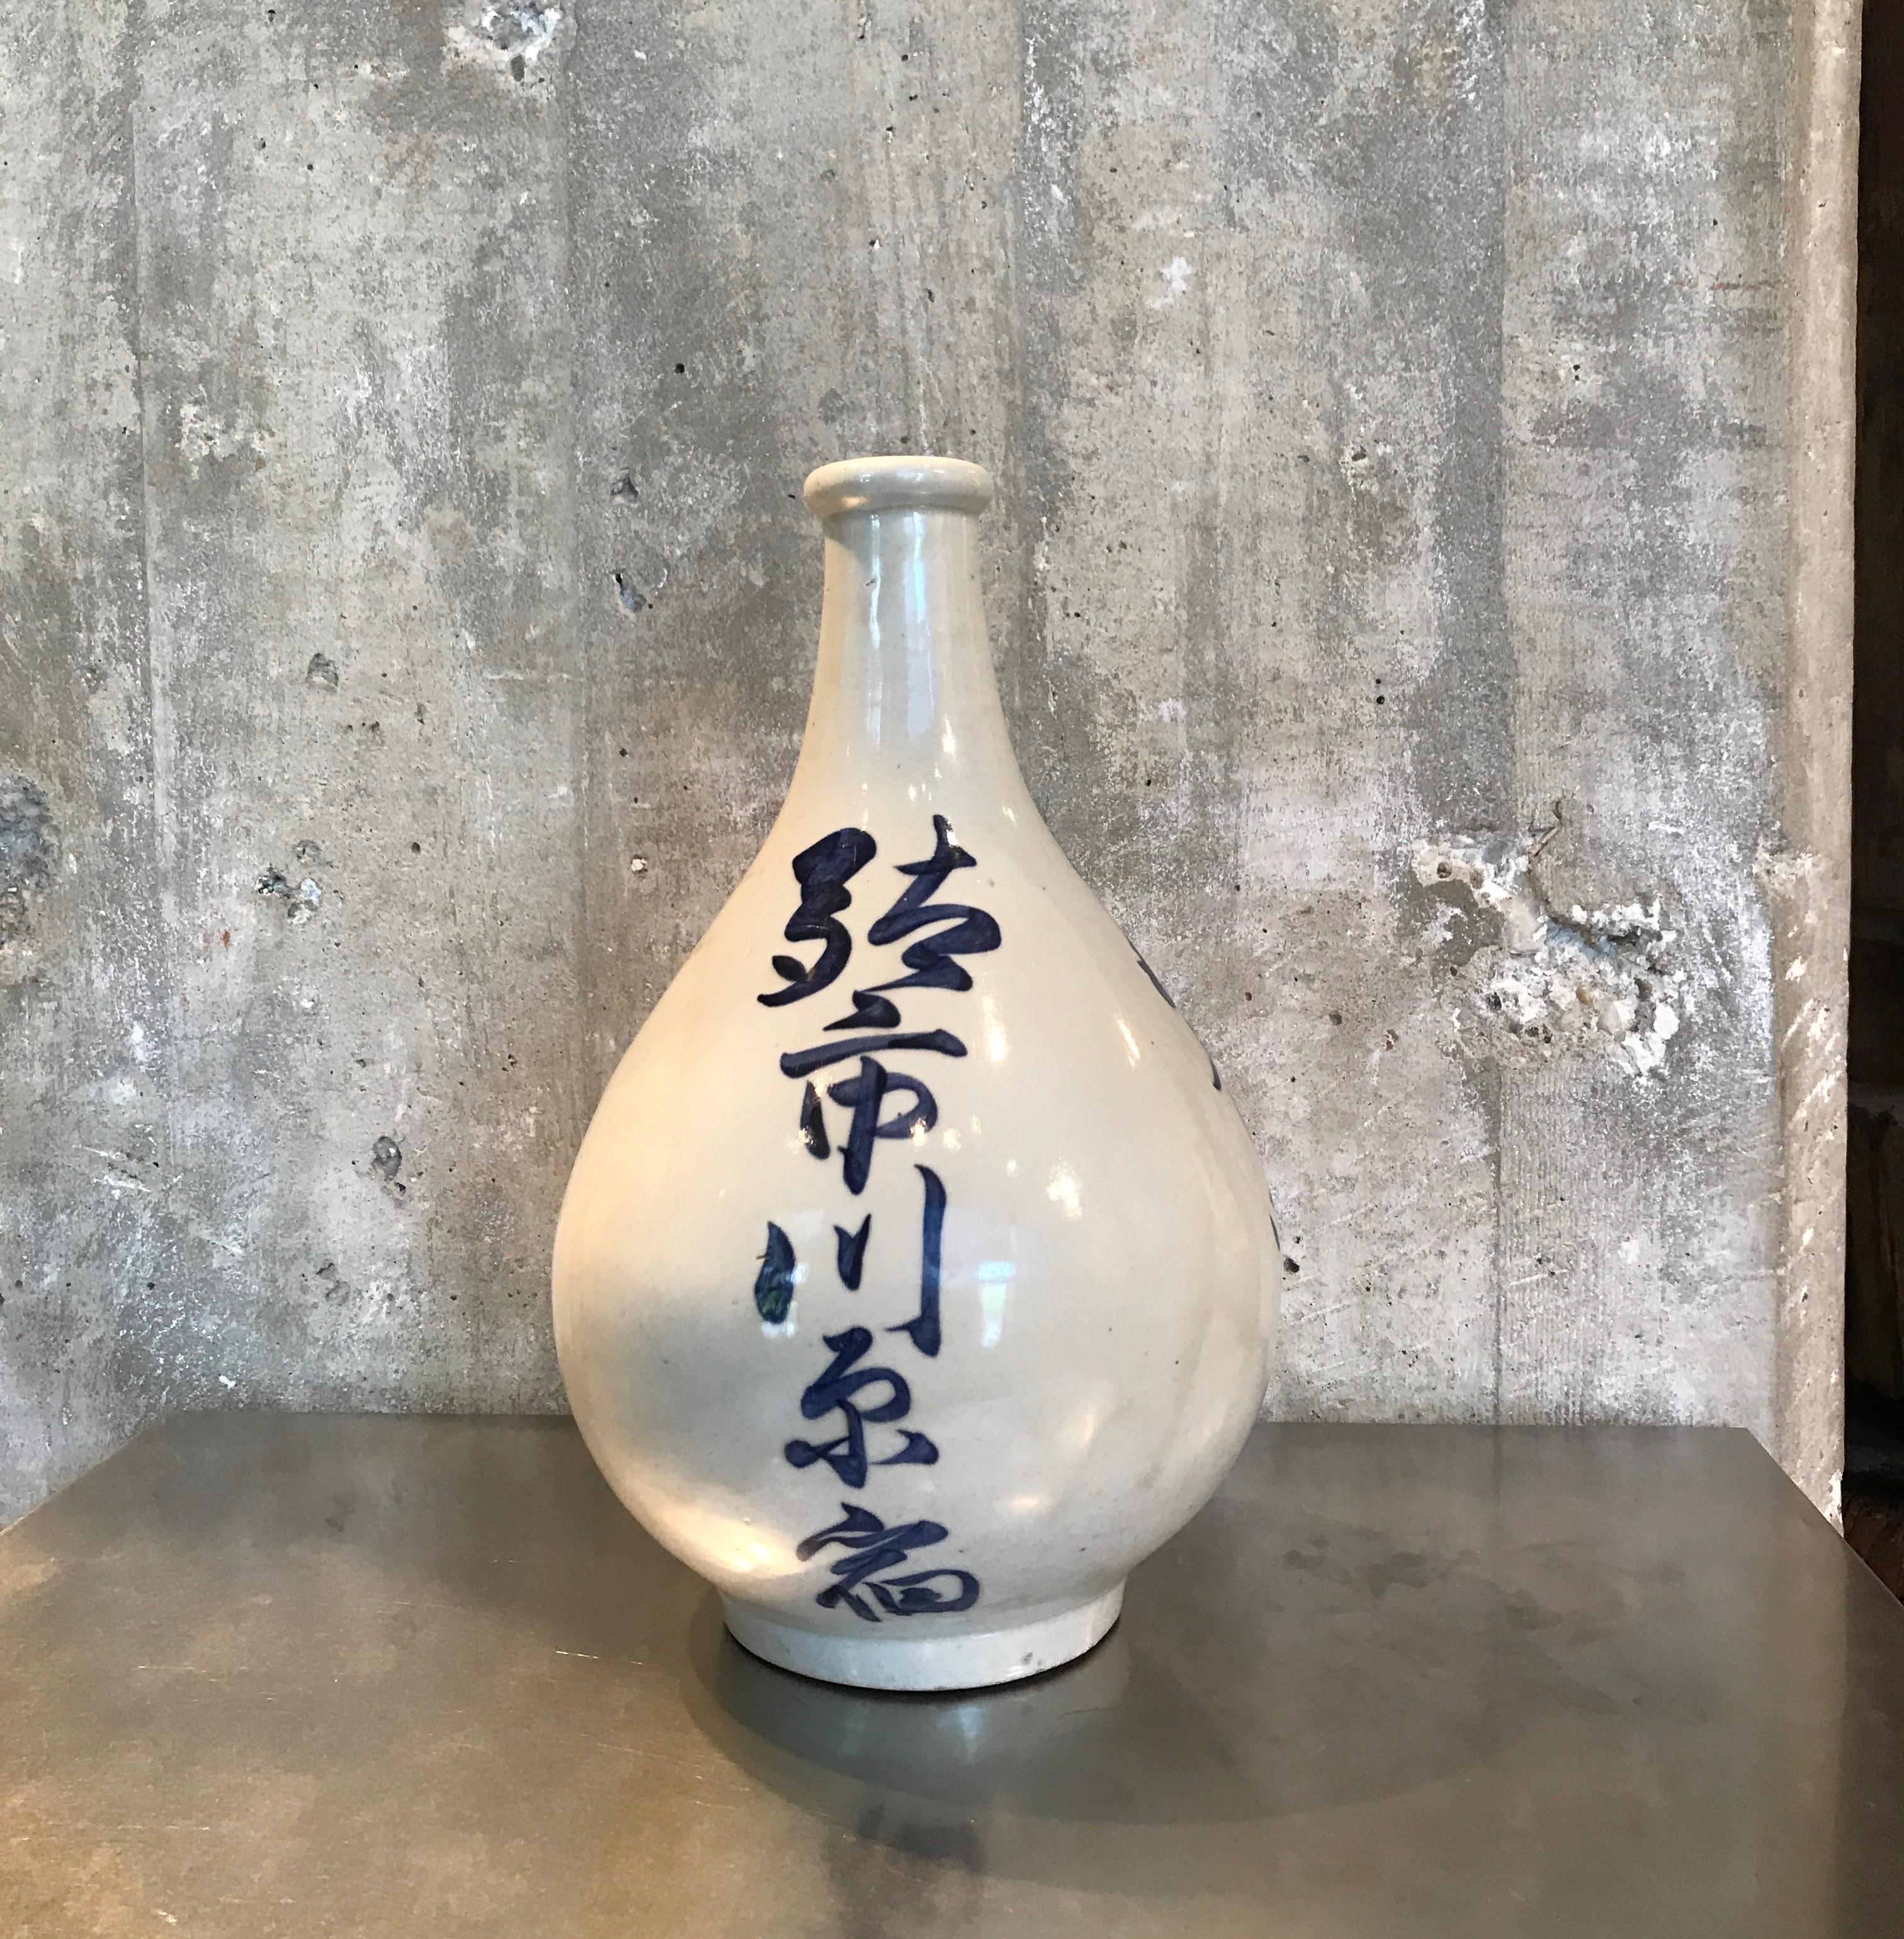 Vintage Japanese Sake Bottle with Hand Painted Calligraphy 6